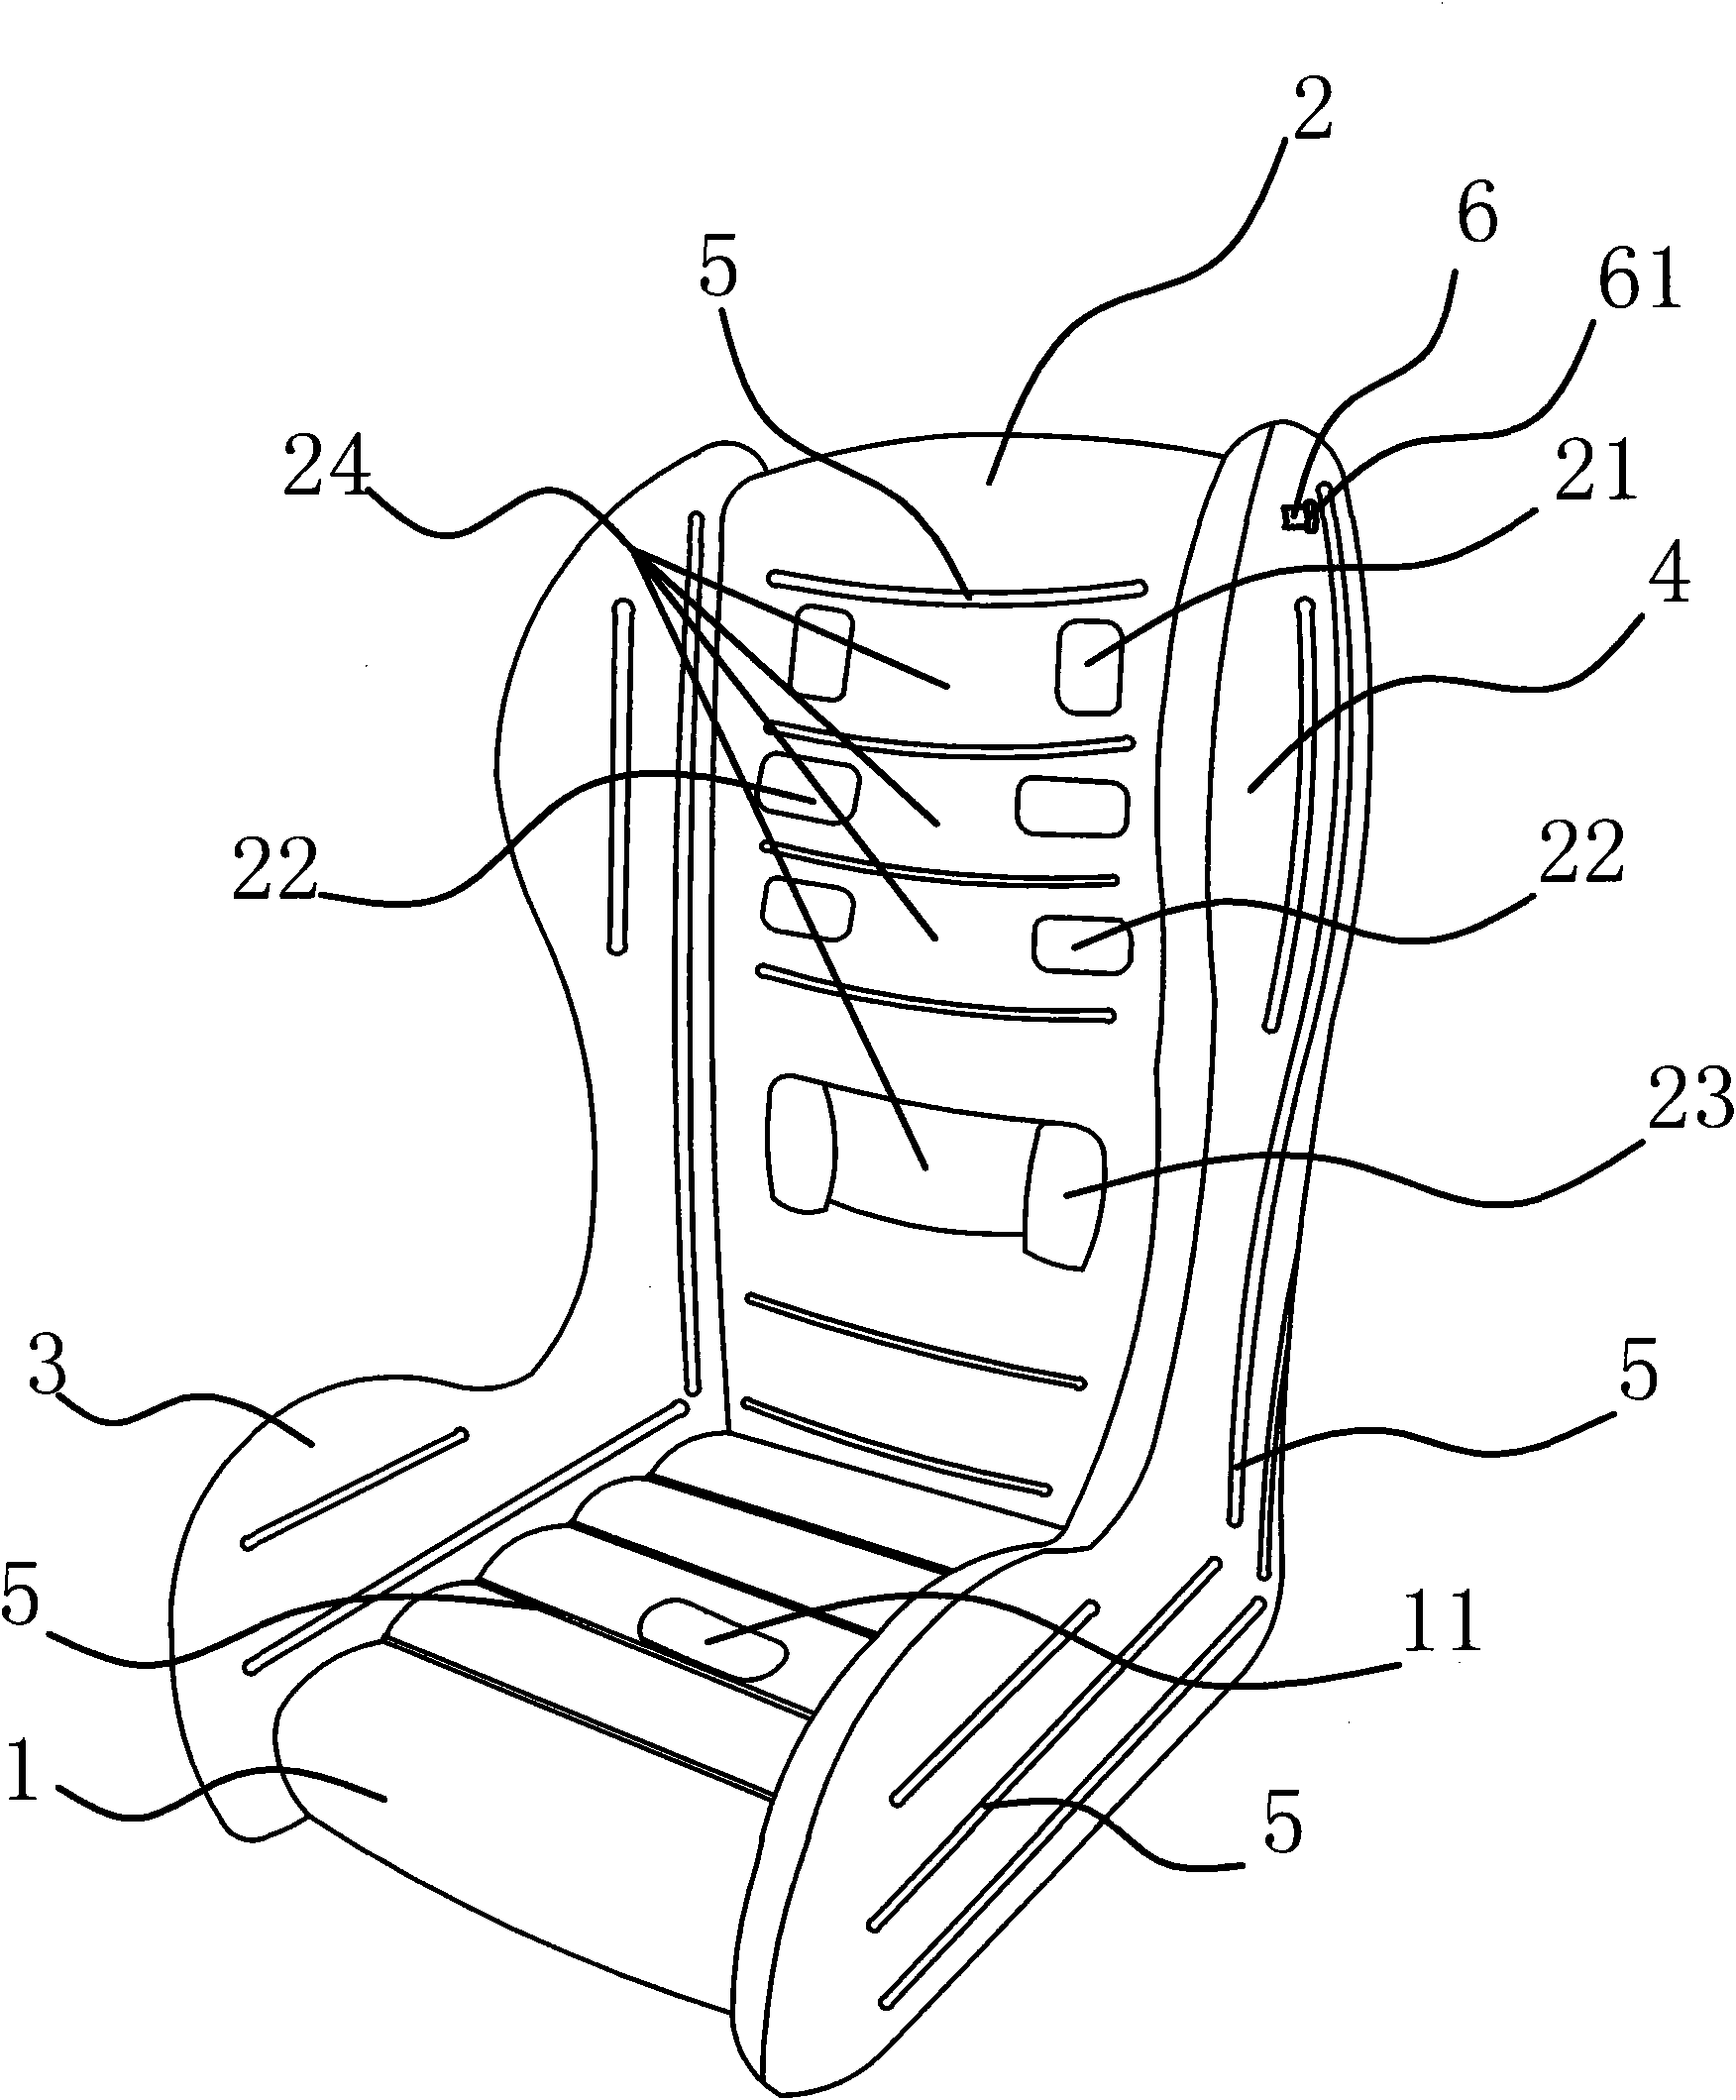 Child safety inflatable seat for vehicle